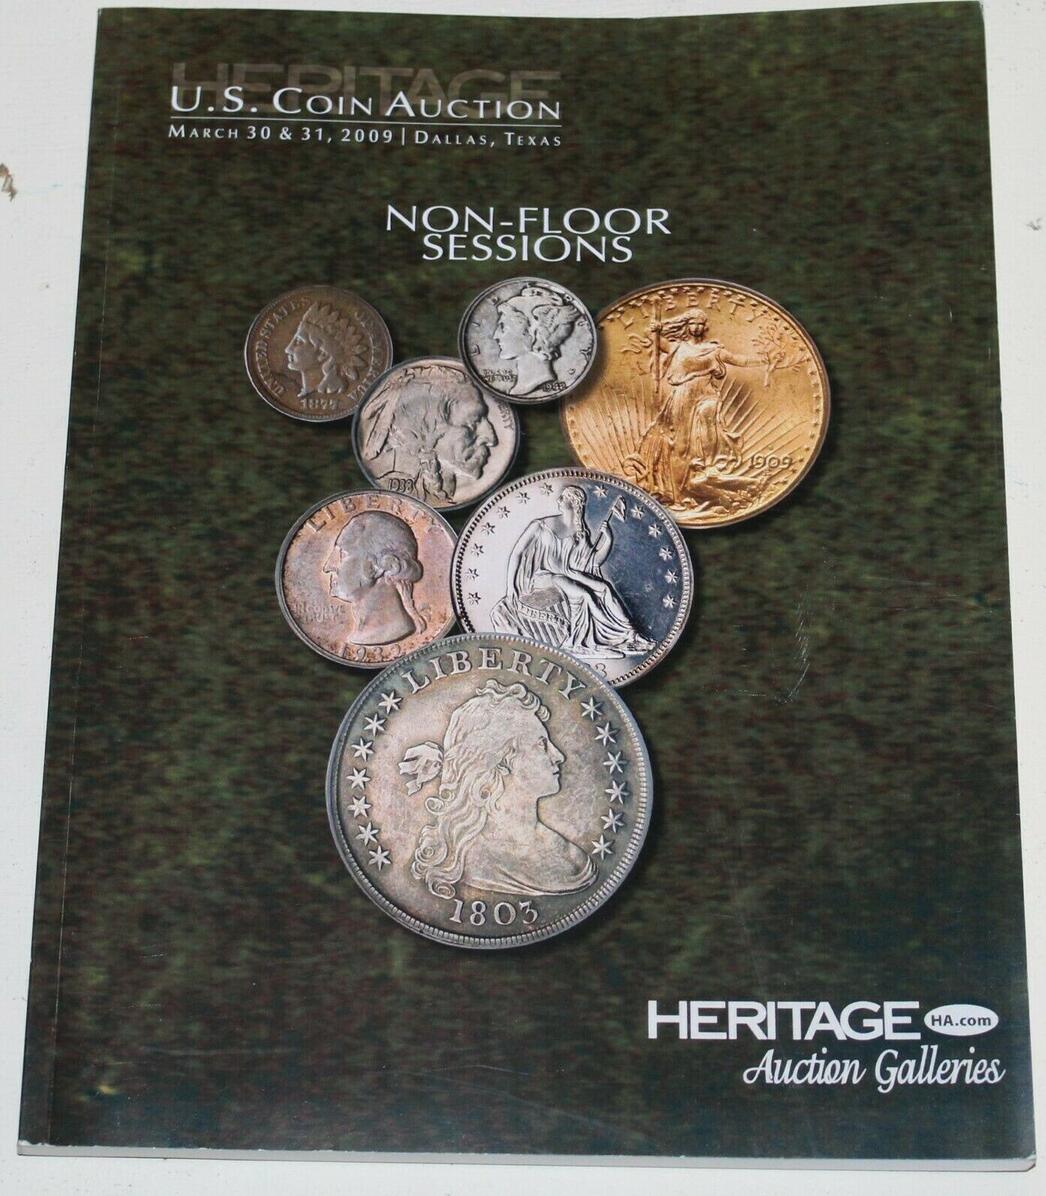 Most valuable dollar coins in circulation - do you have one worth